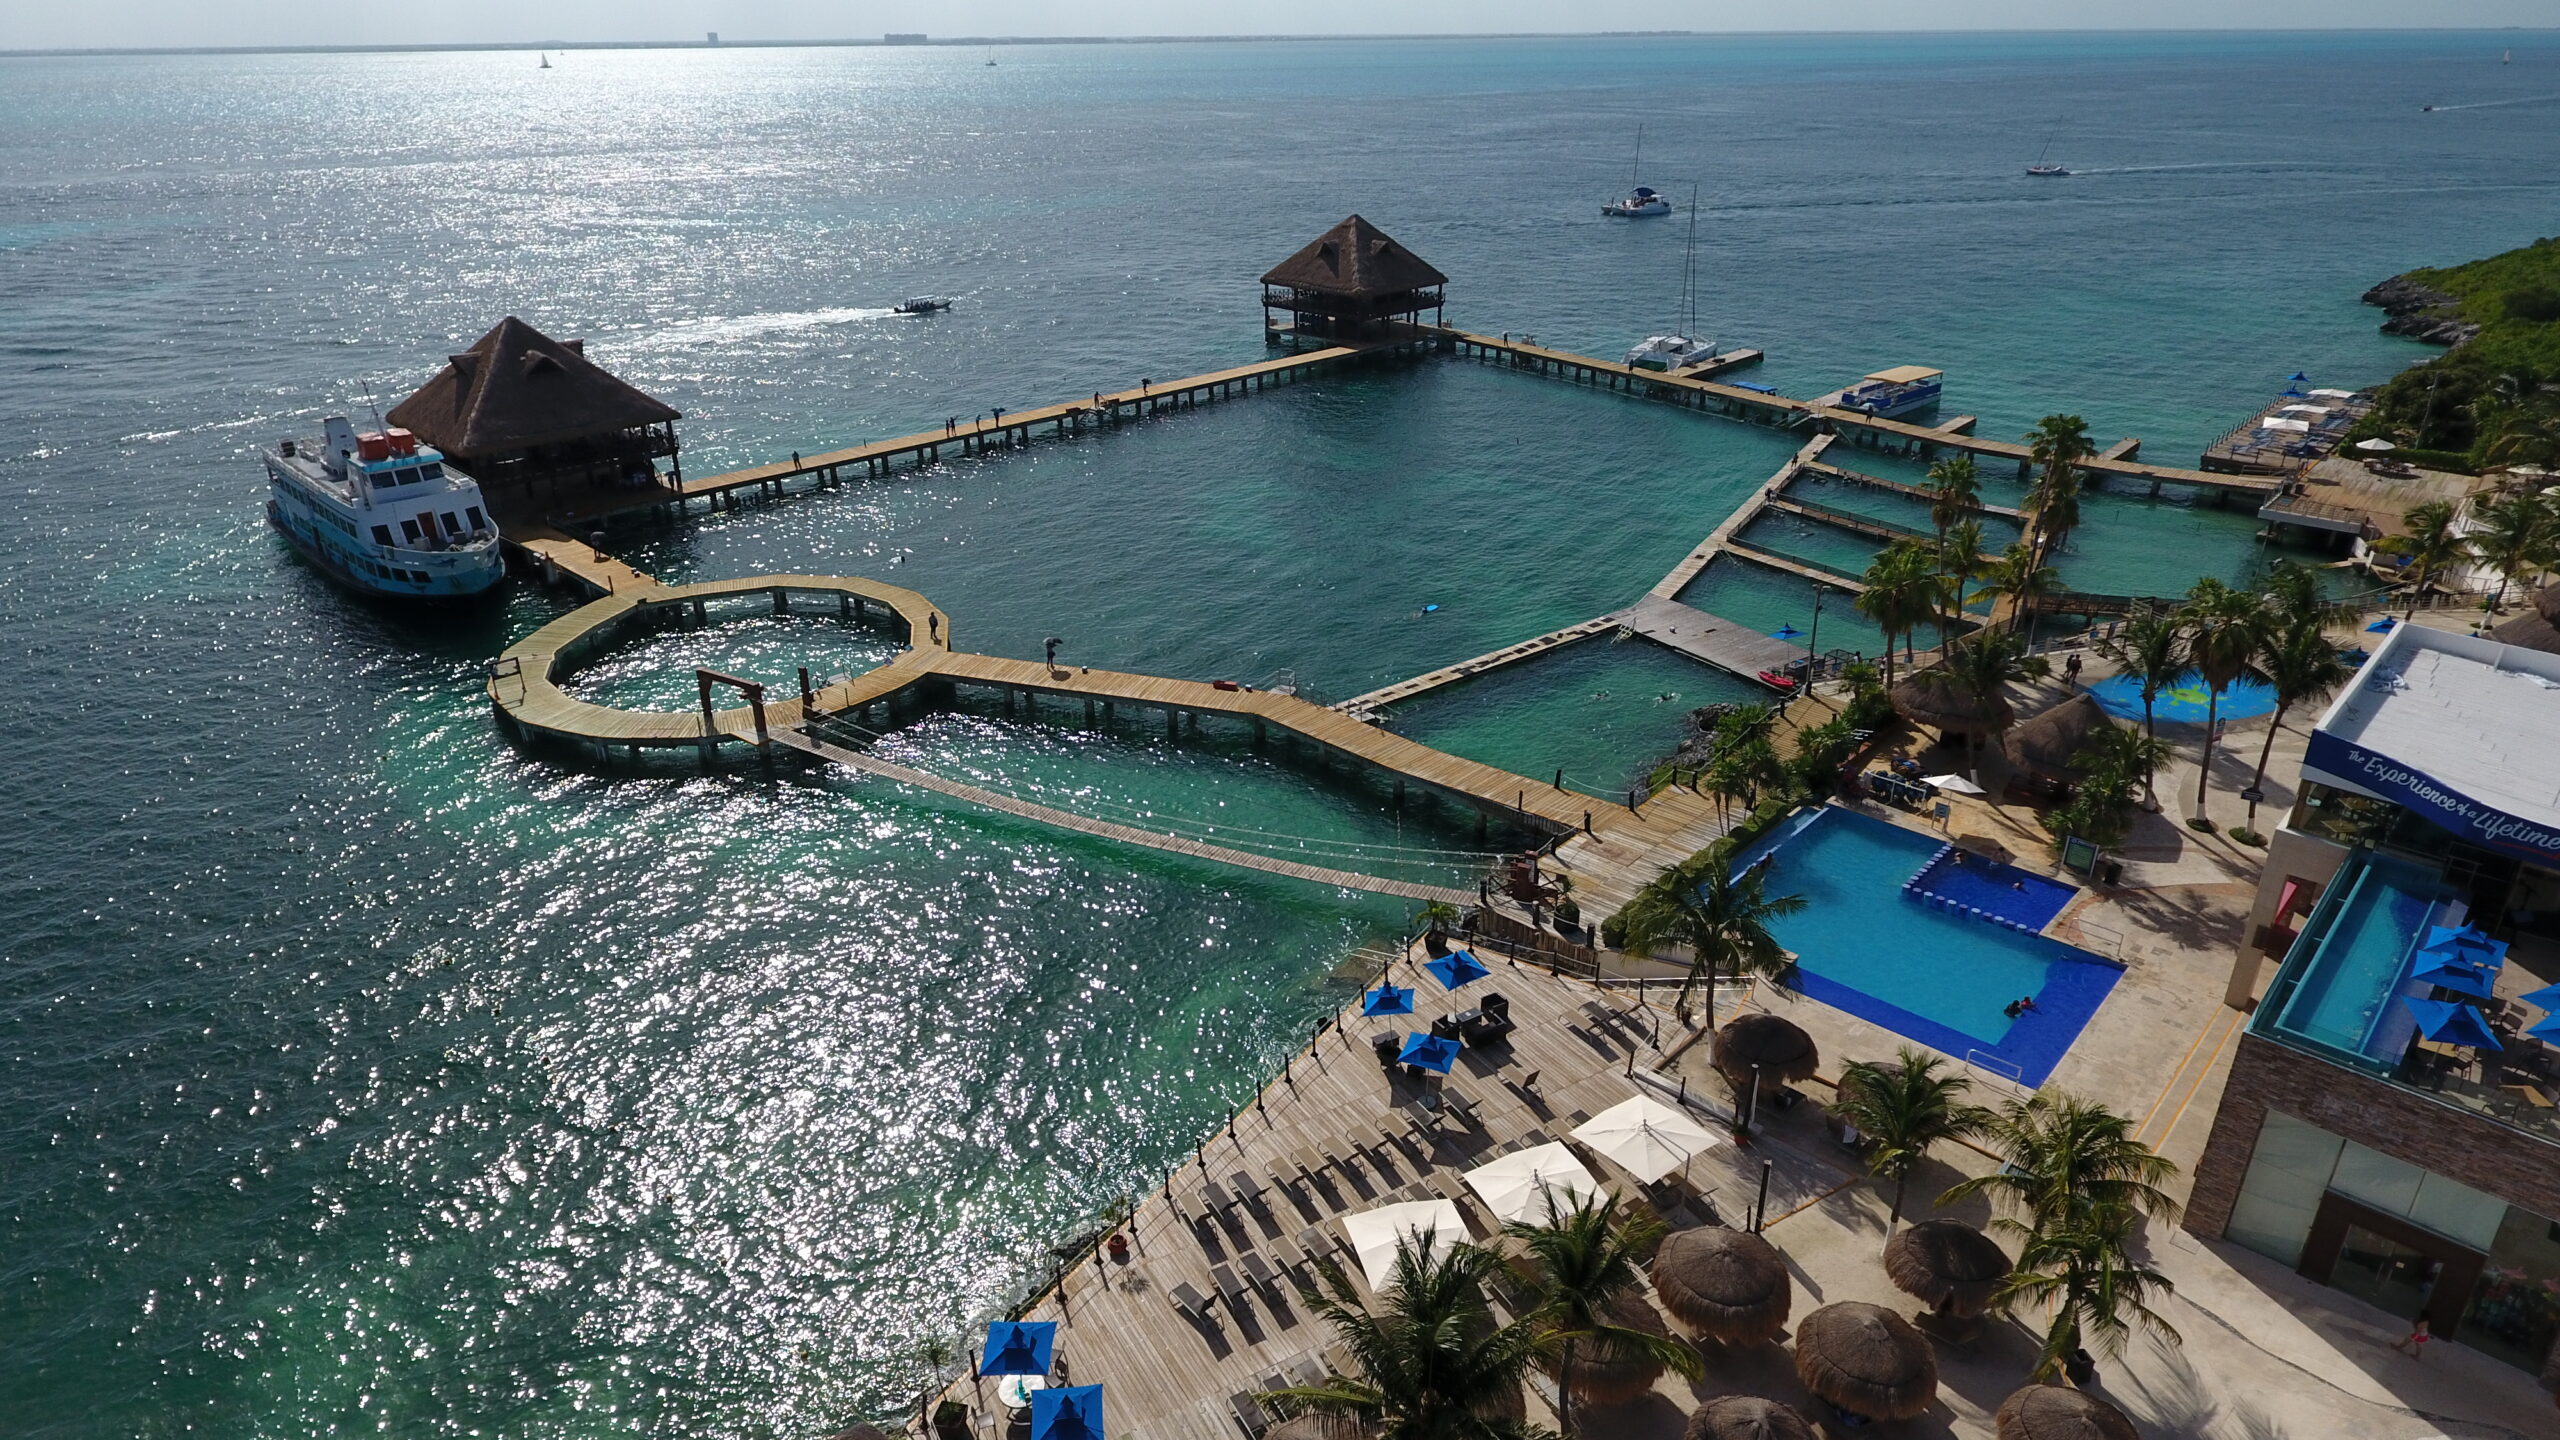 The Ultimate 1-Day Guide to Isla Mujeres - What to Do in 24 Hours